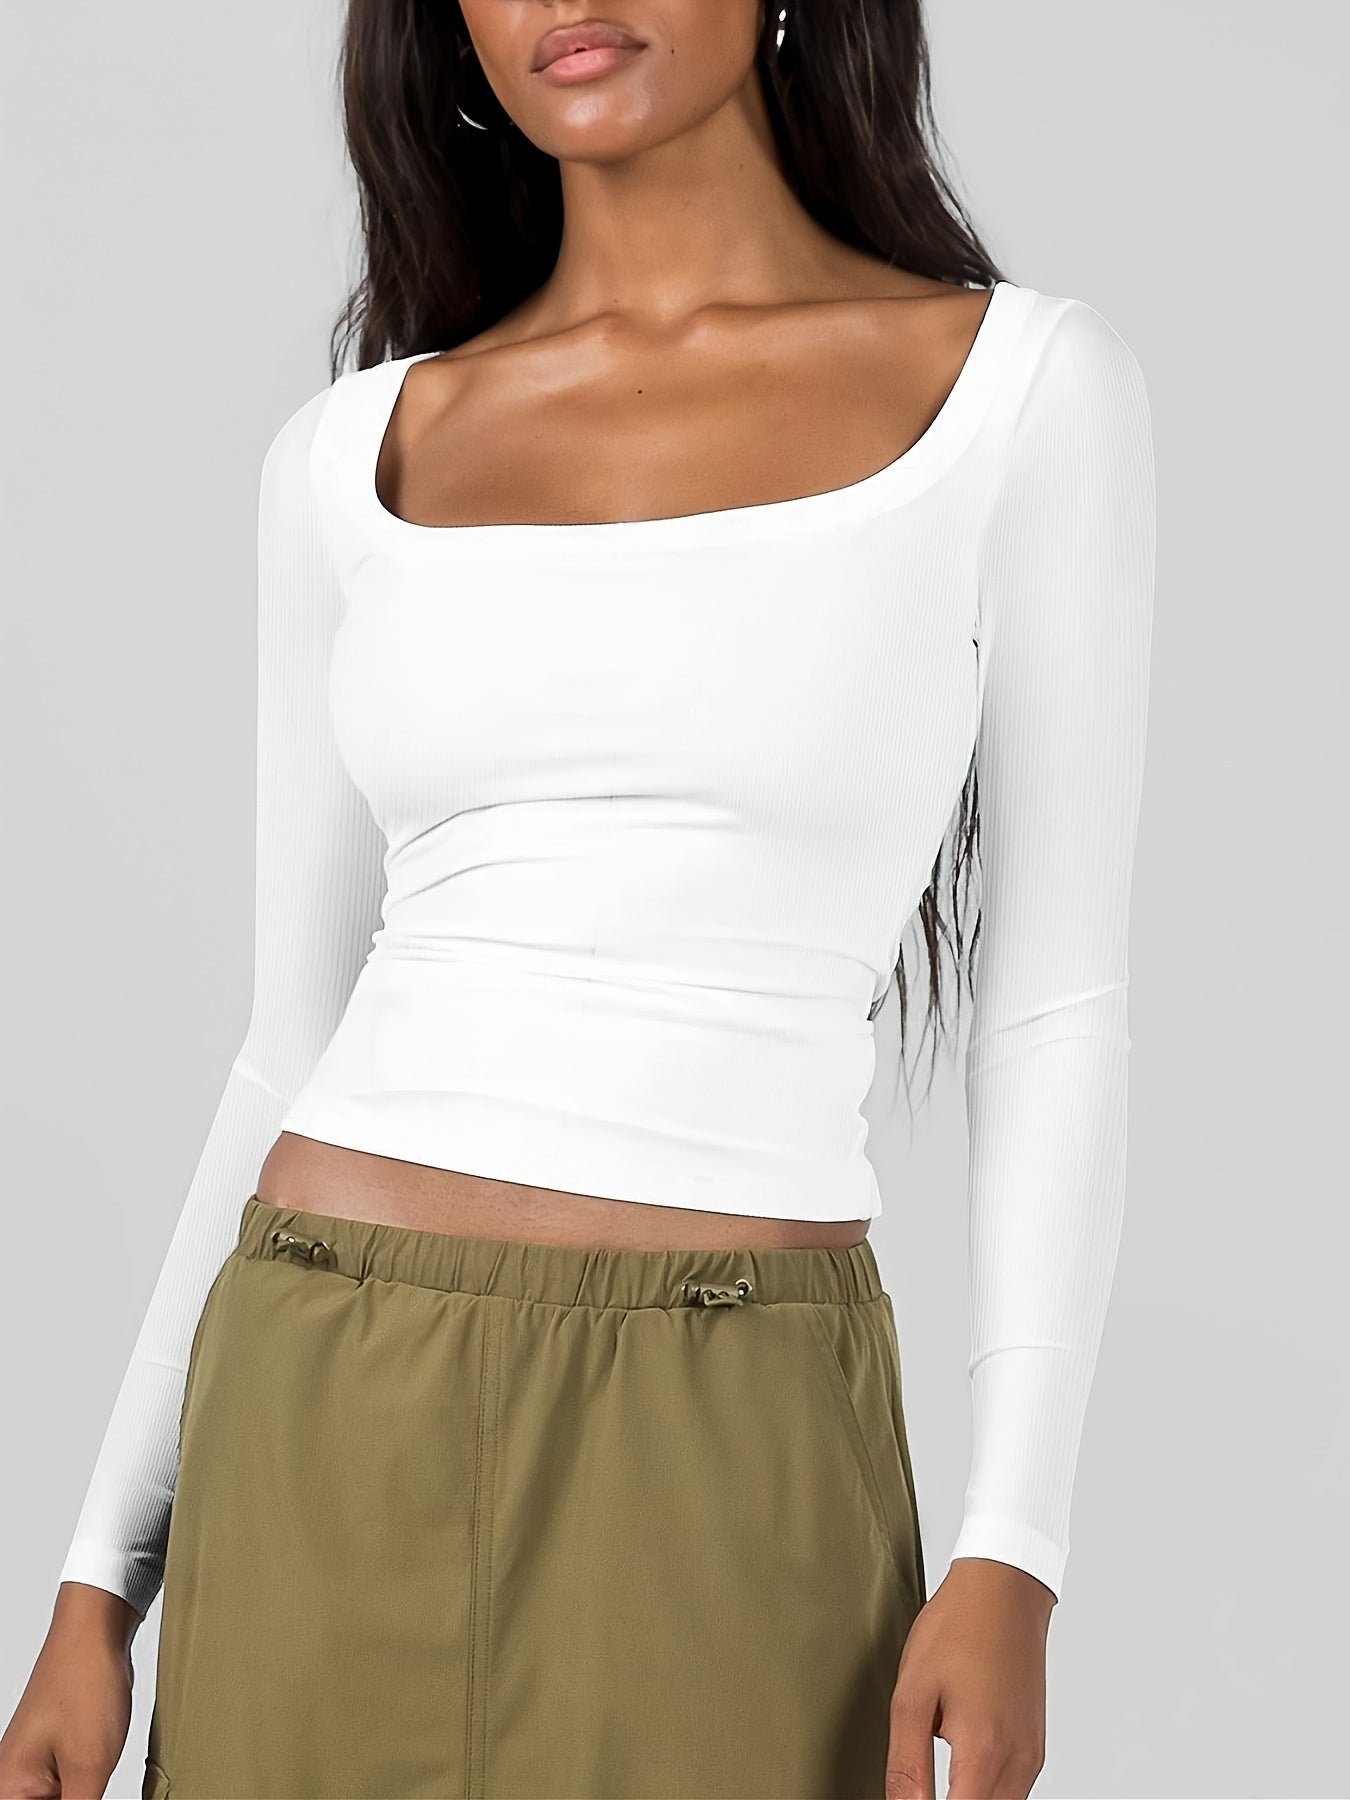 Antmvs Solid Scoop Neck T-Shirt, Casual Long Sleeve Top For Spring & Fall, Women's Clothing